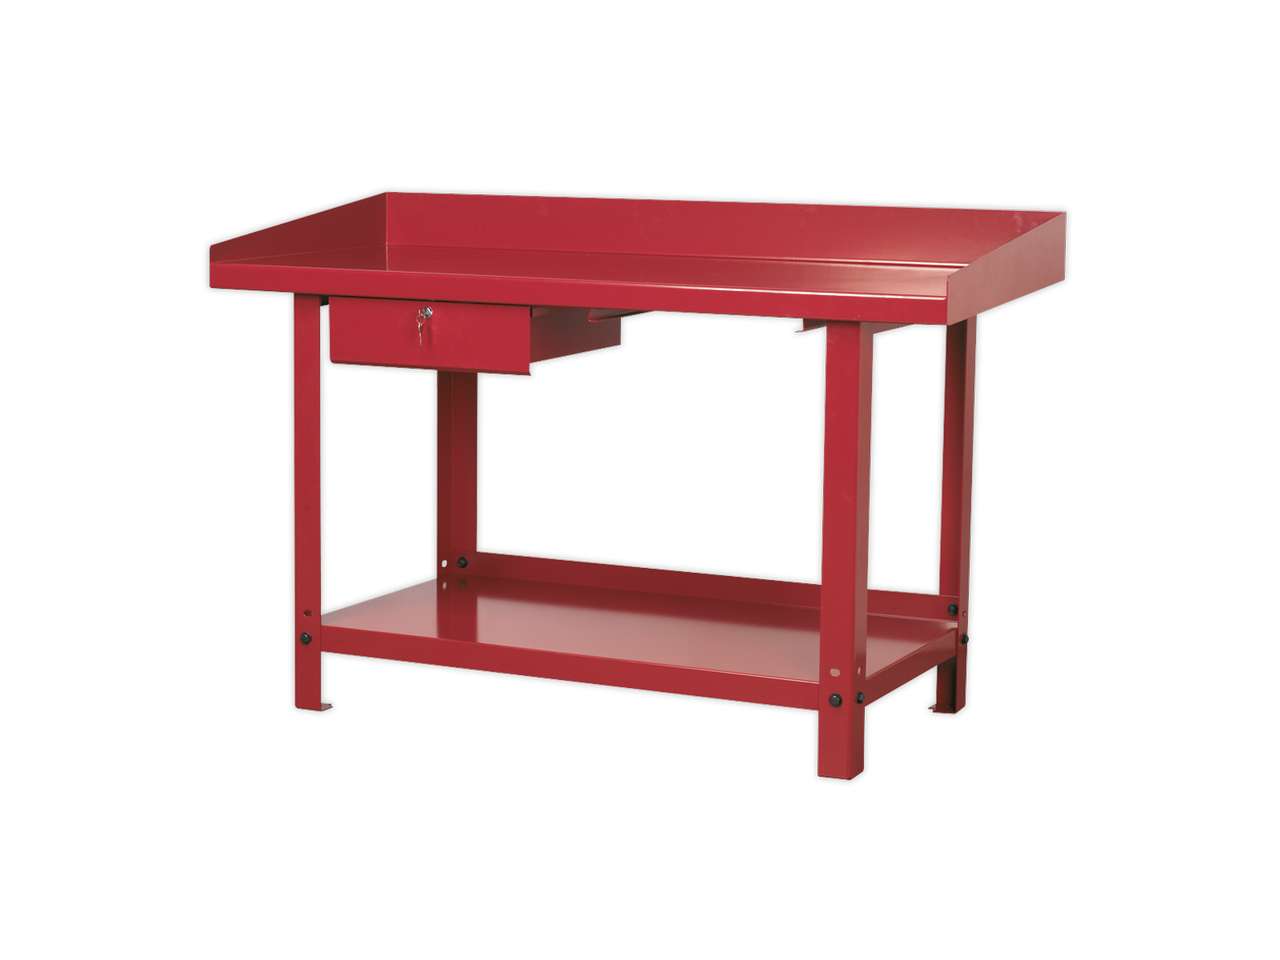 Sealey AP1010 Workbench Steel 1mtr with 1 Drawer £208.00 Save £61.95 